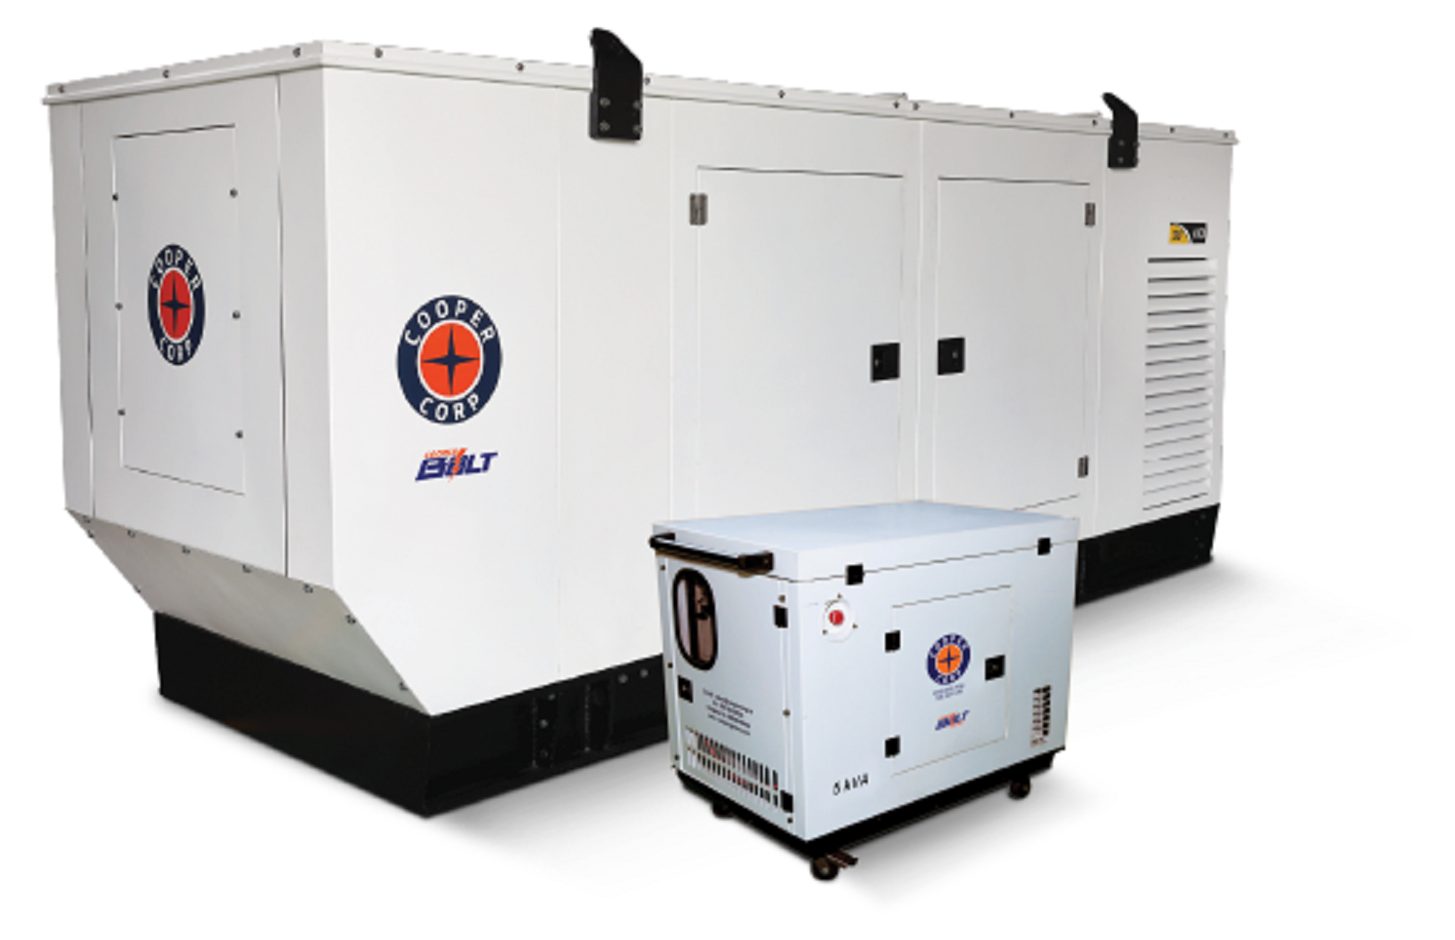 cooper-corporation-offers-a-world-class-genset-series-for-the-northern-market-ranging-from-5kva-to-250kva